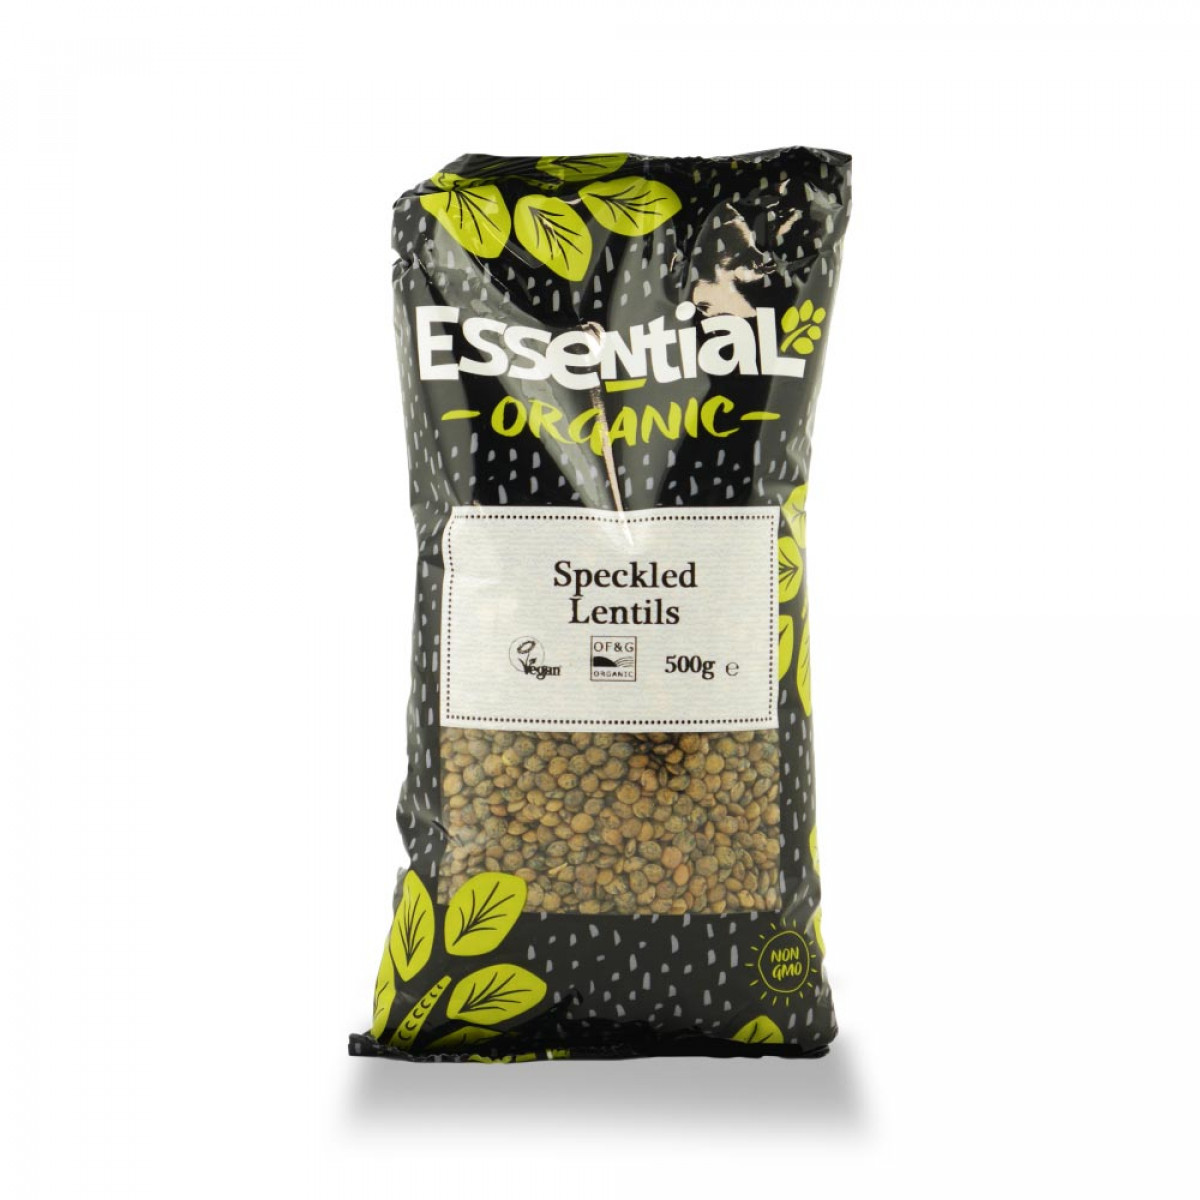 Product picture for Dark Speckled Lentils